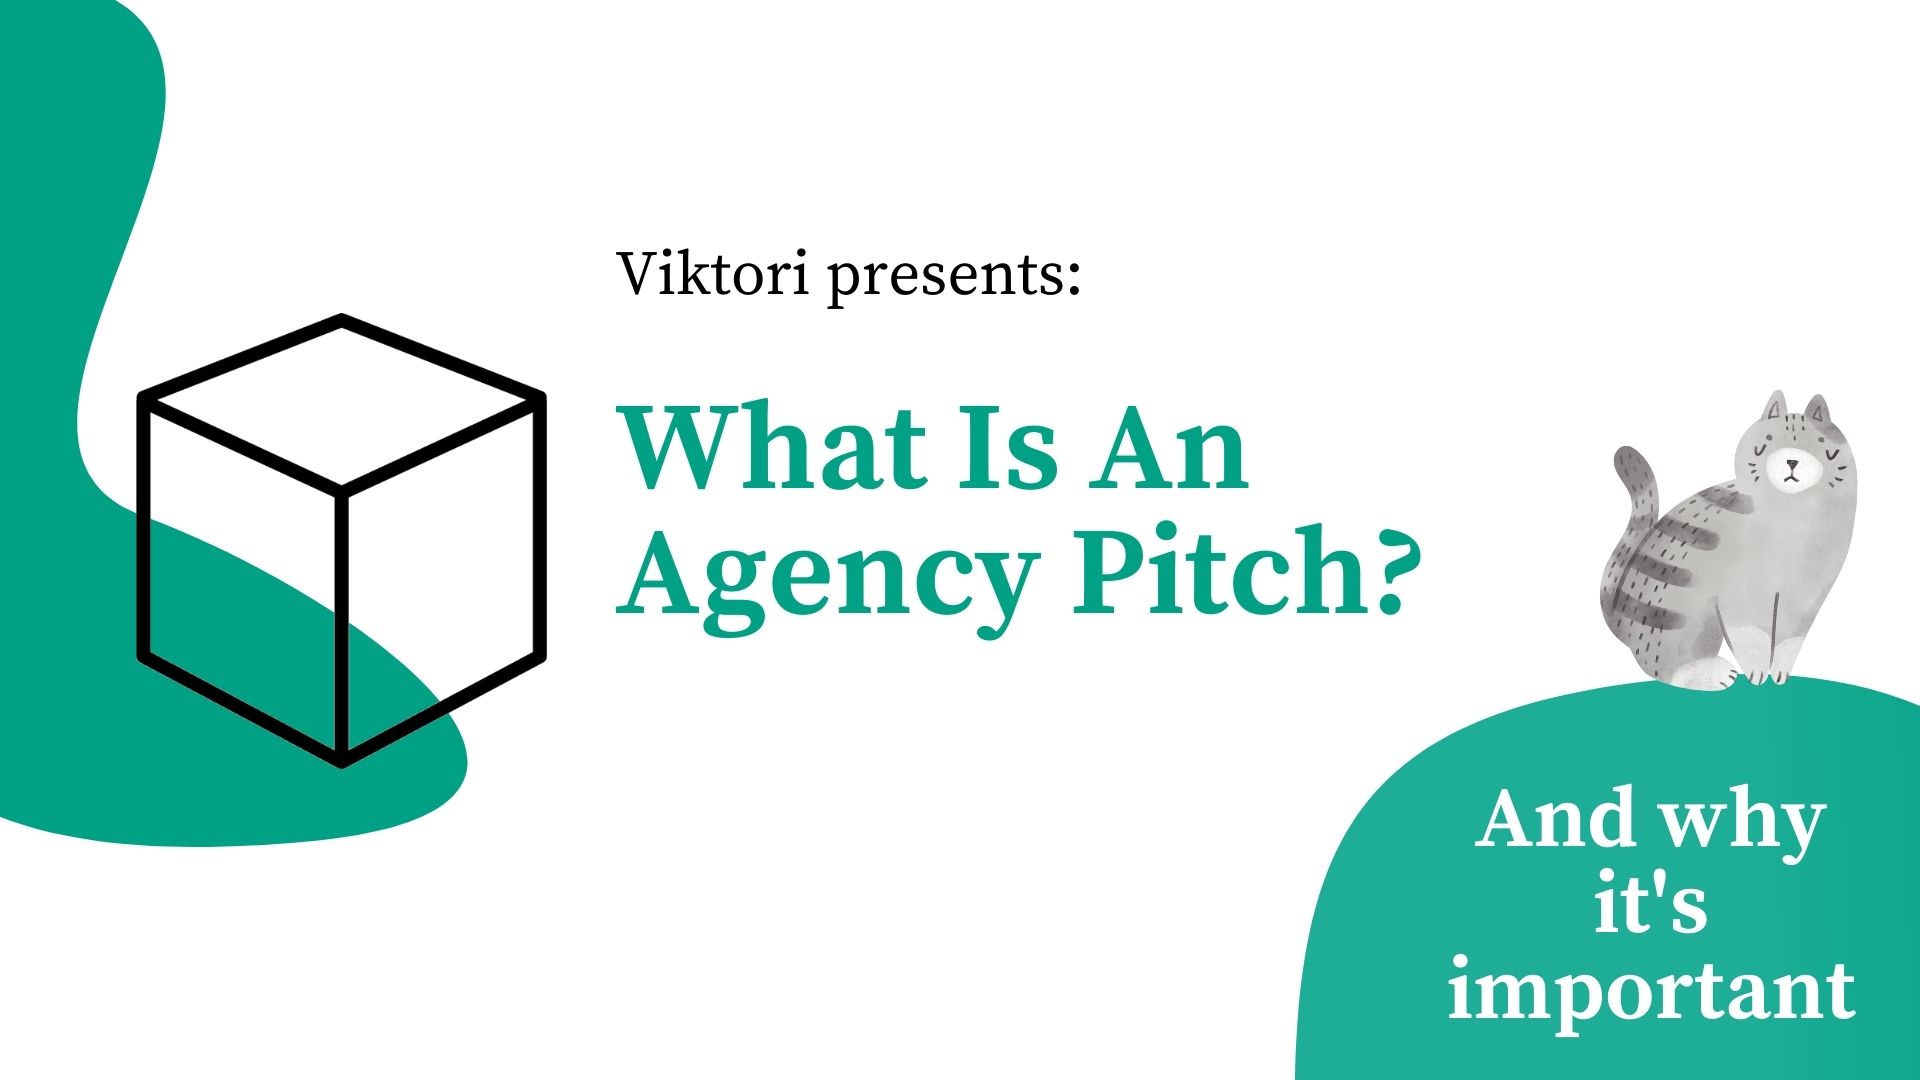 What Is An Agency Pitch